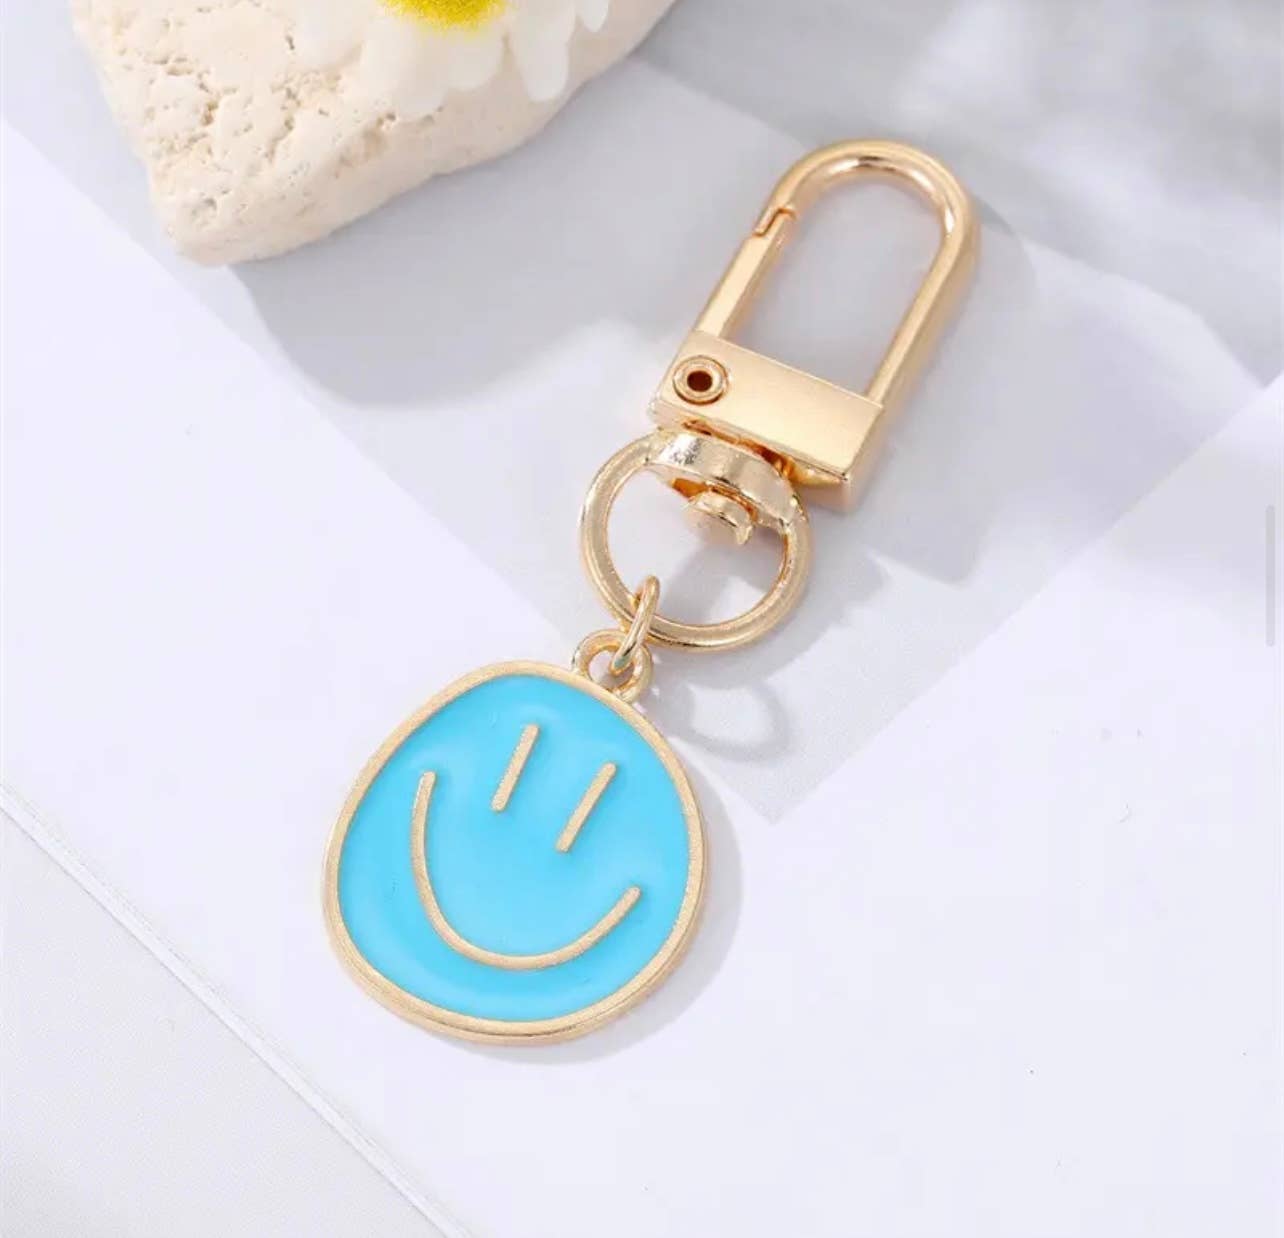 Smile Happy Face Keychain: Hot pink